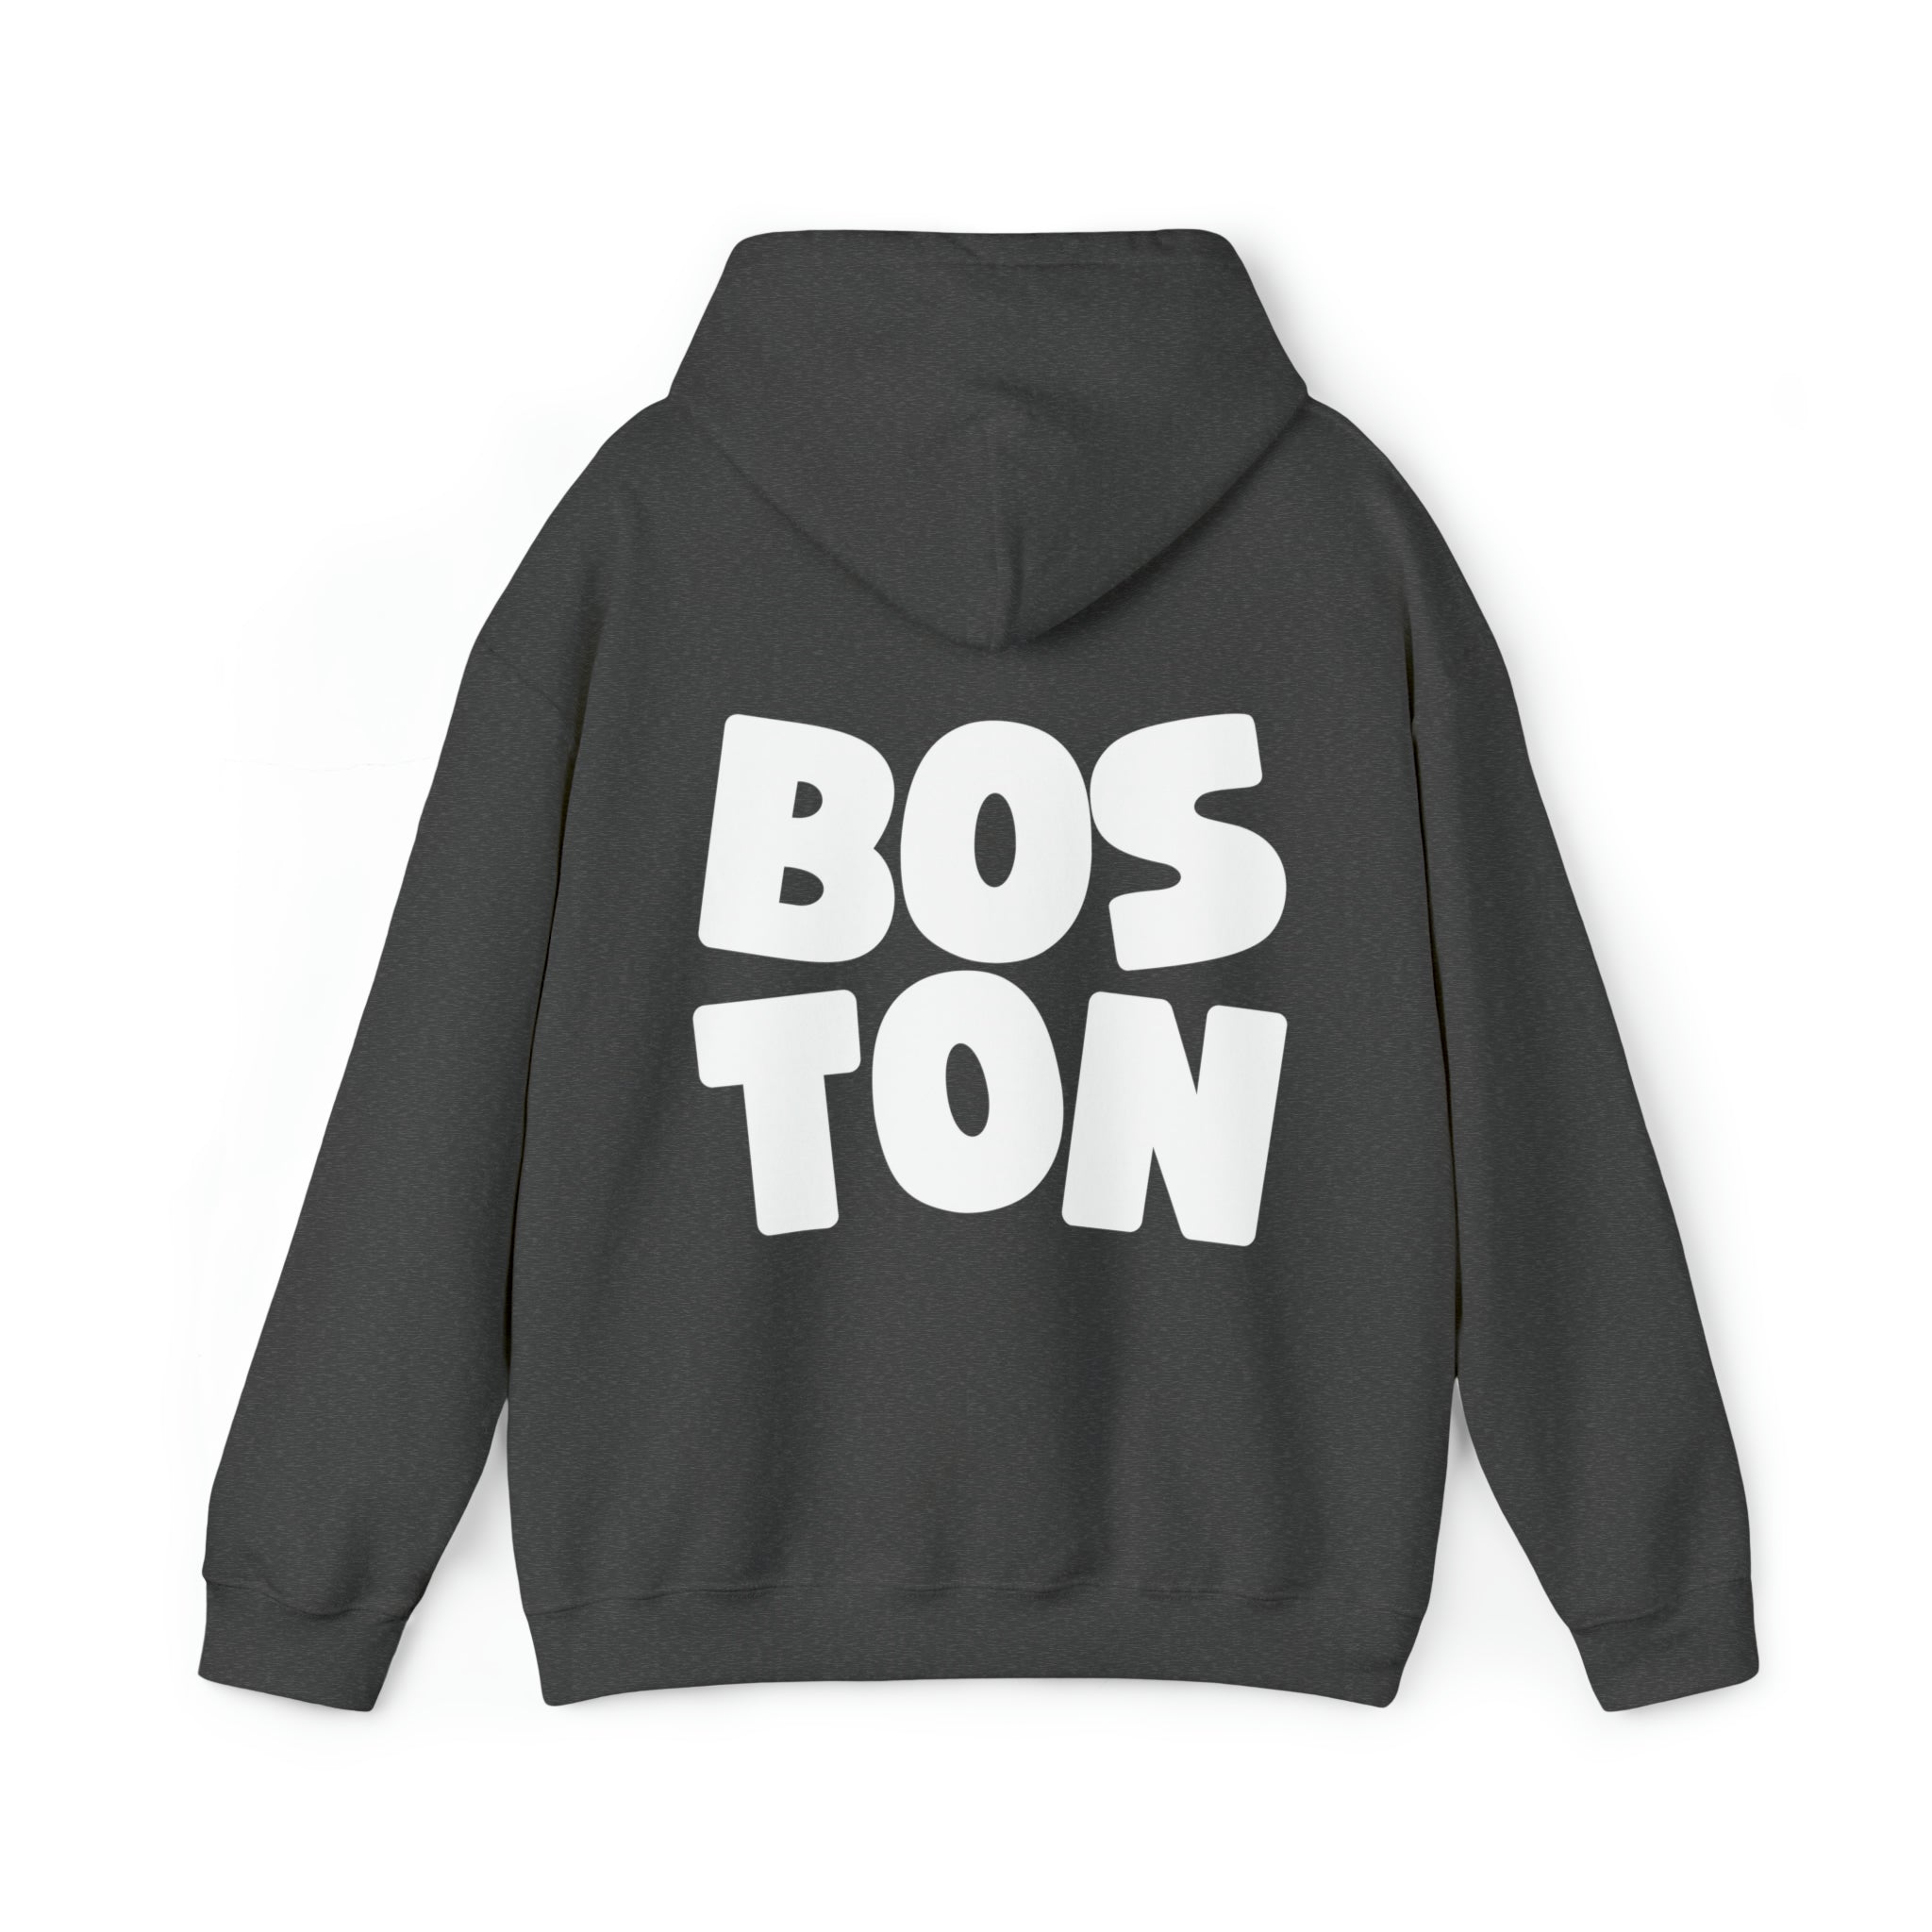 Image of the Boston Hoodie Sweatshirt laid out flat, displaying the pocket placement and overall design.